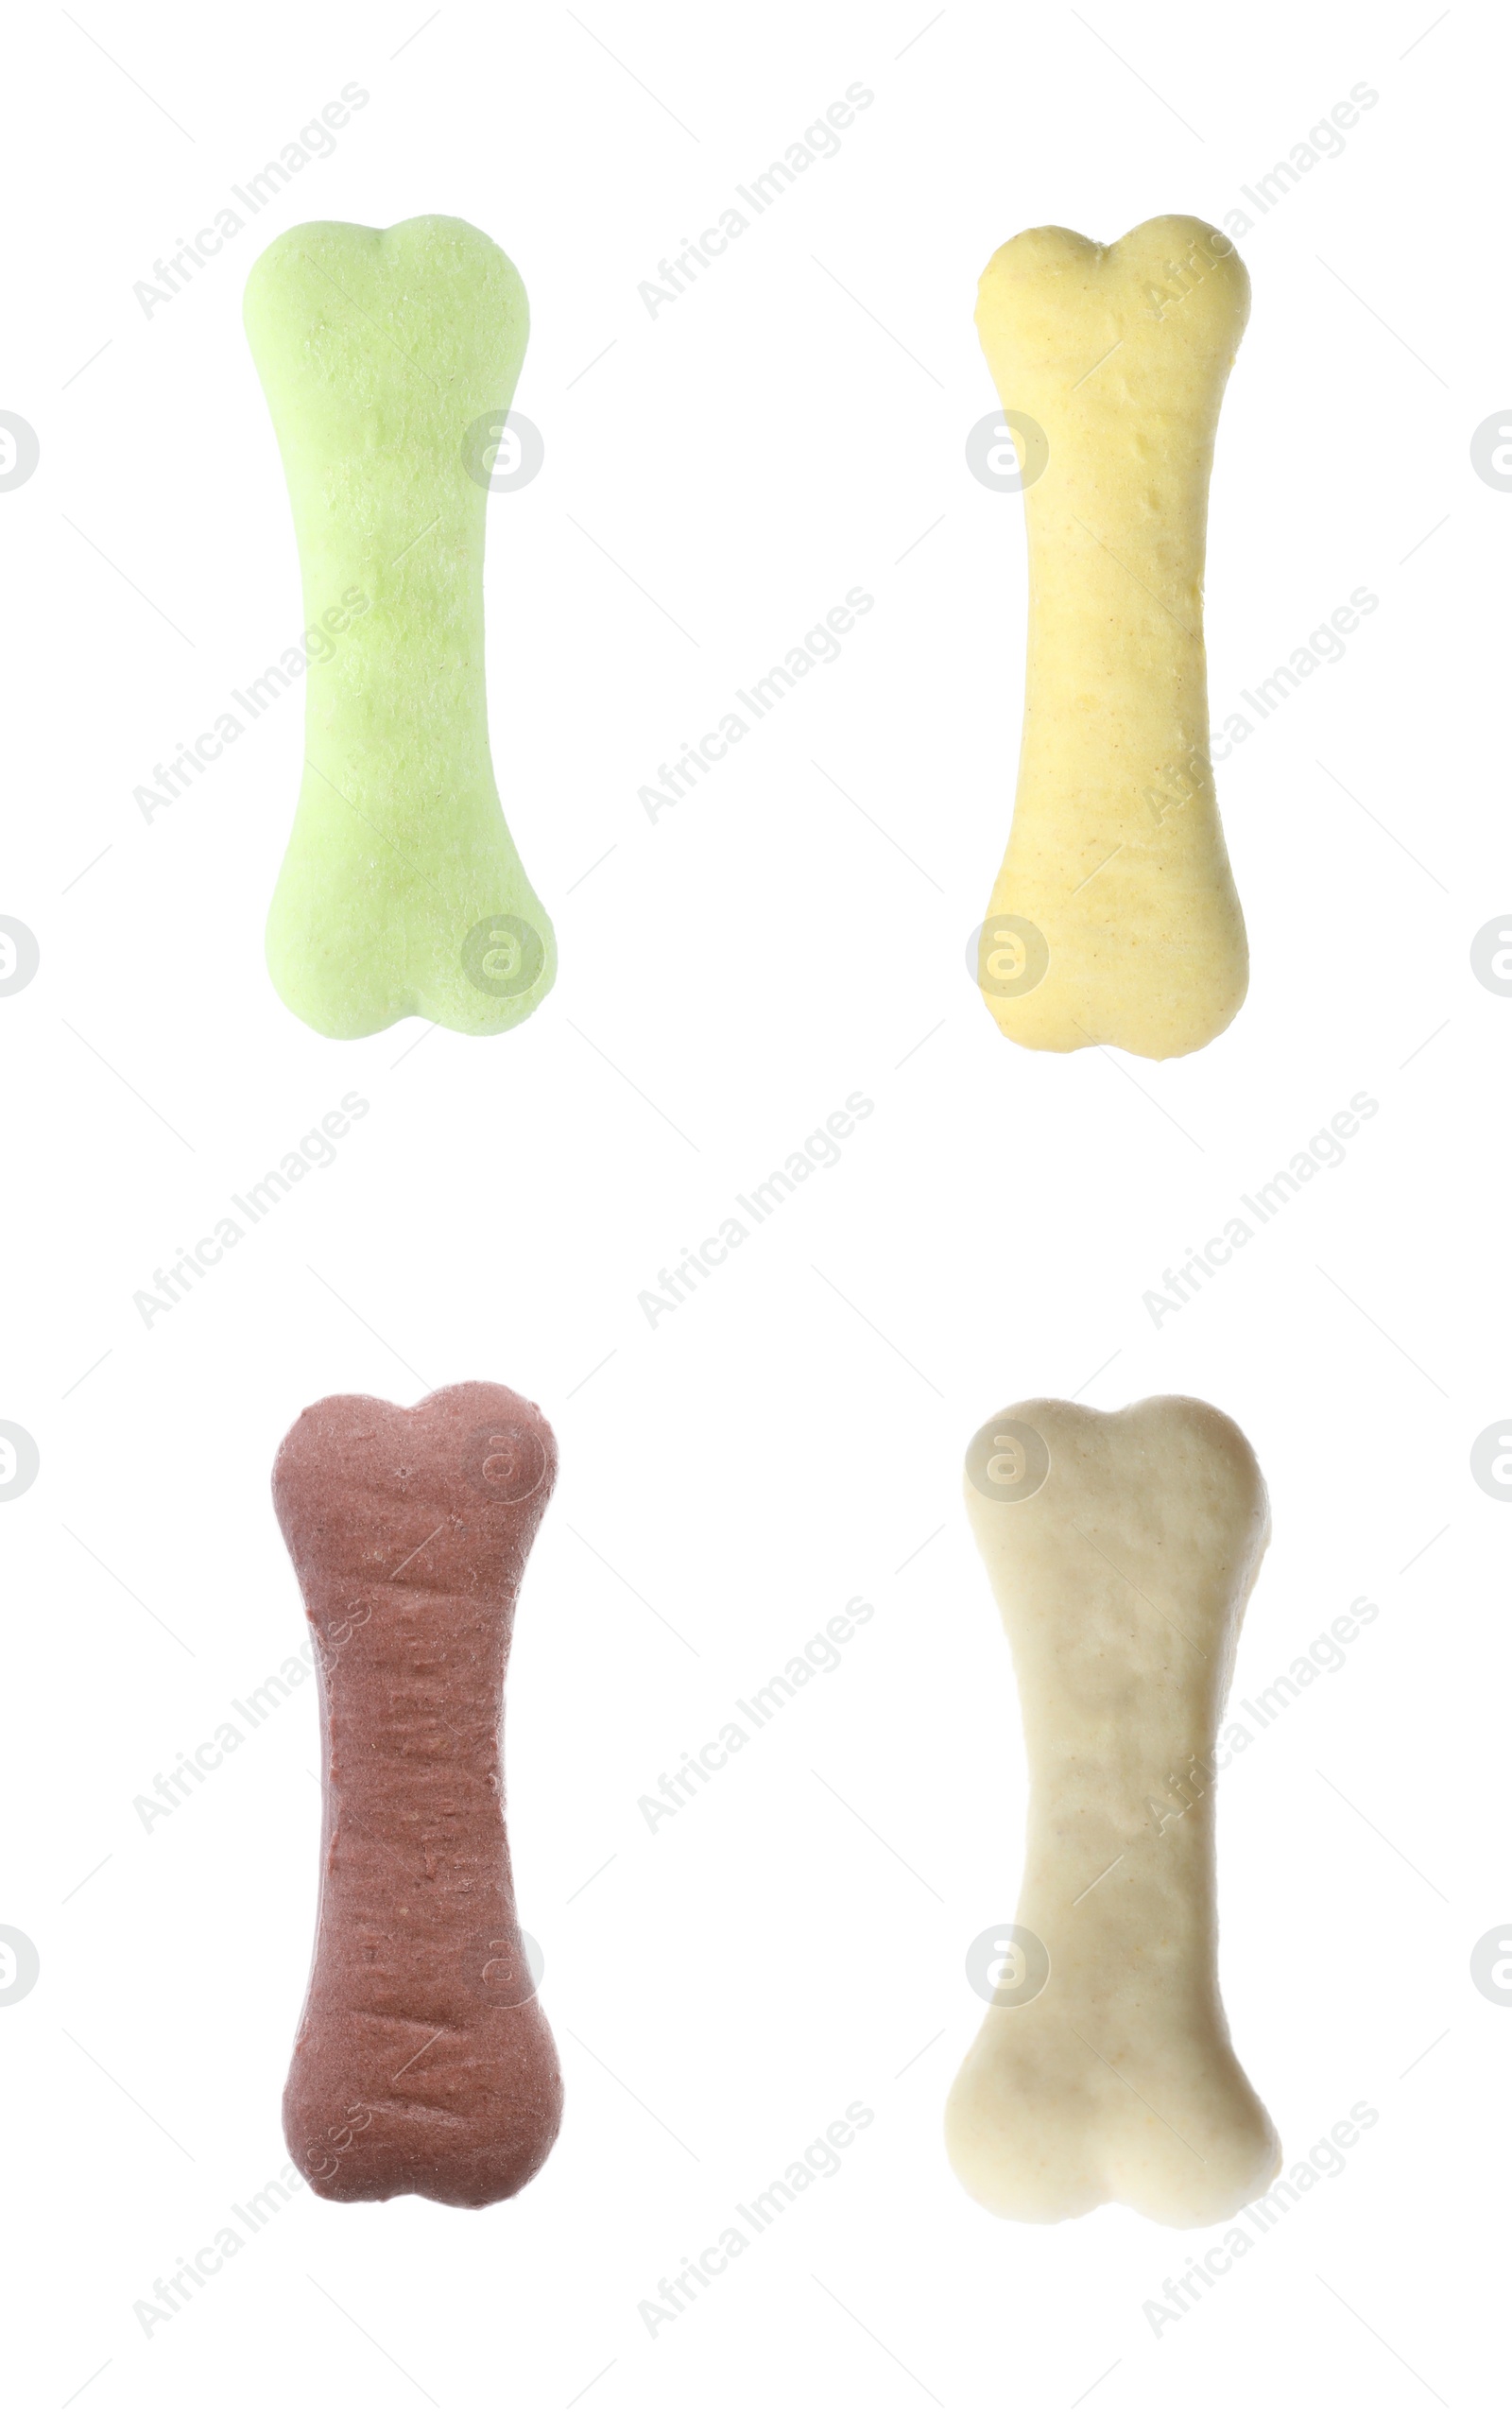 Image of Set of different bone shaped dog cookies on white background